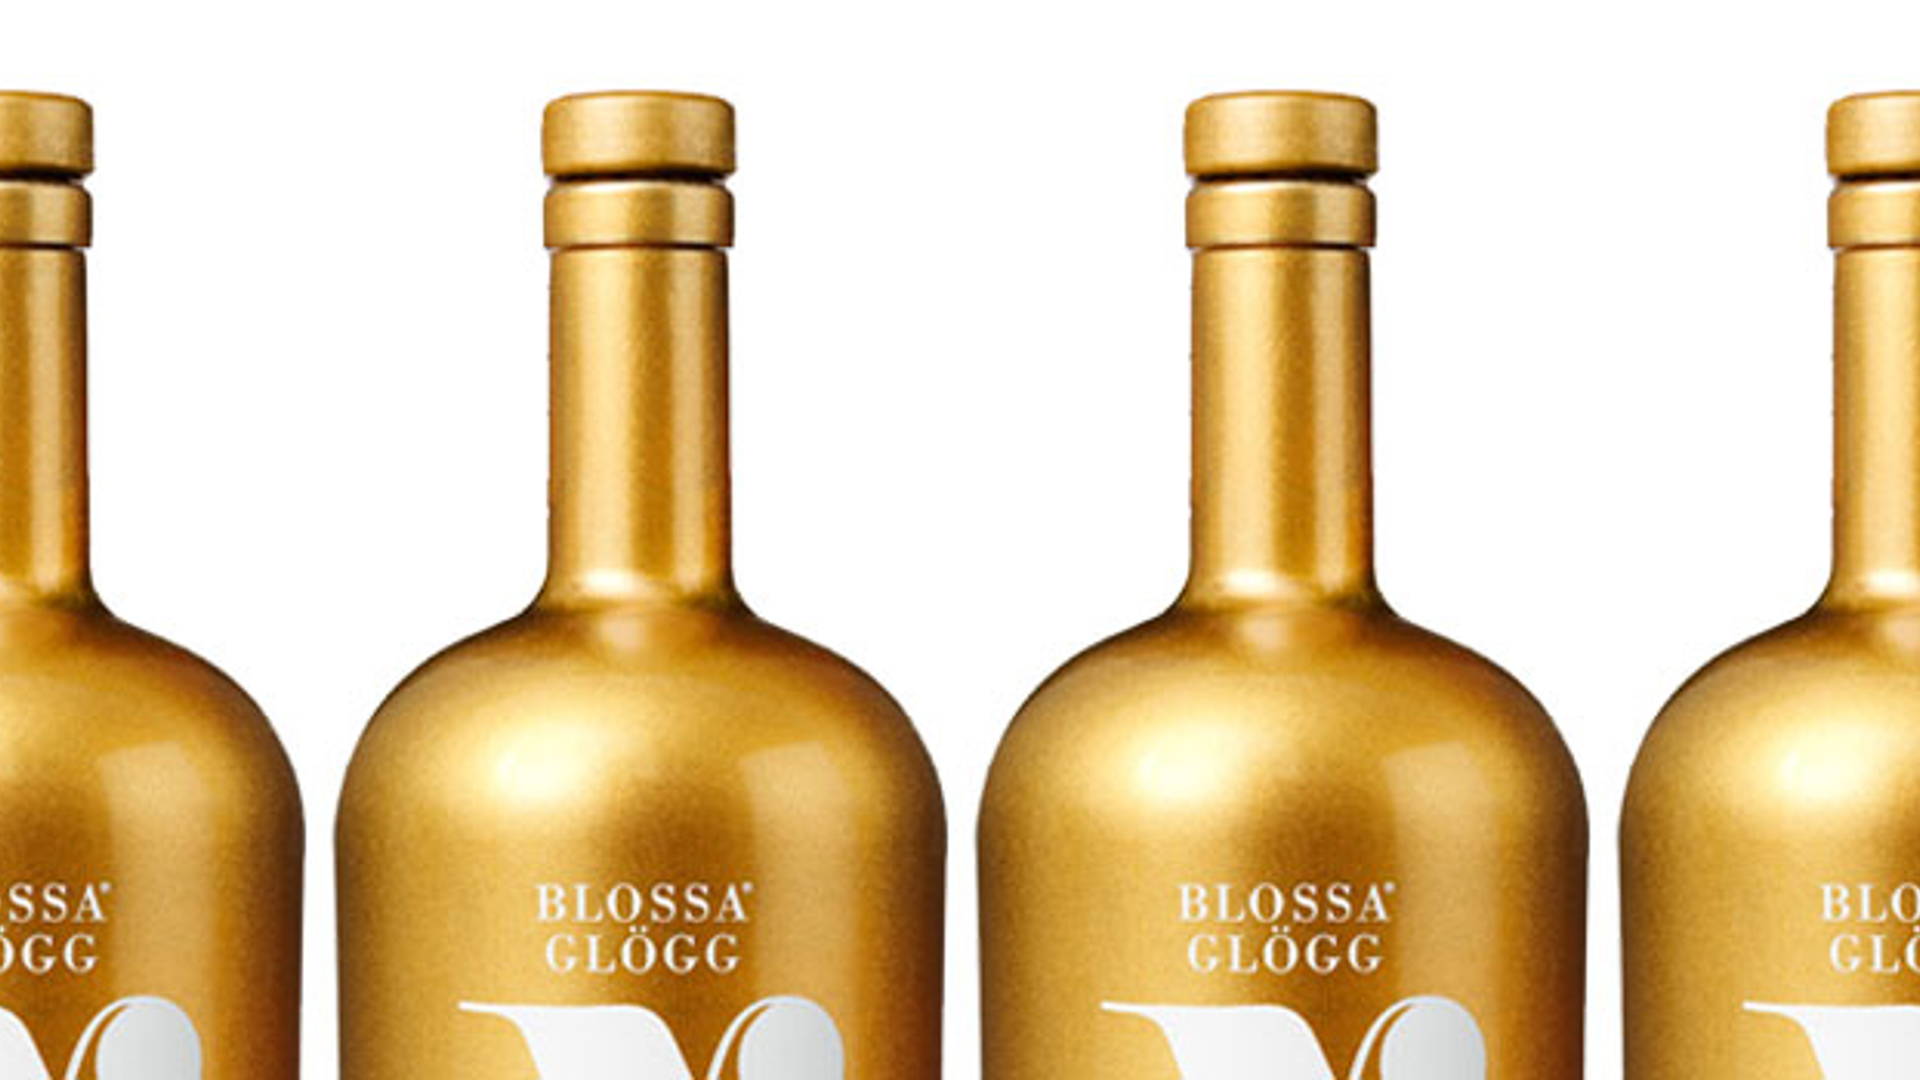 Featured image for Blossa Glögg 2010